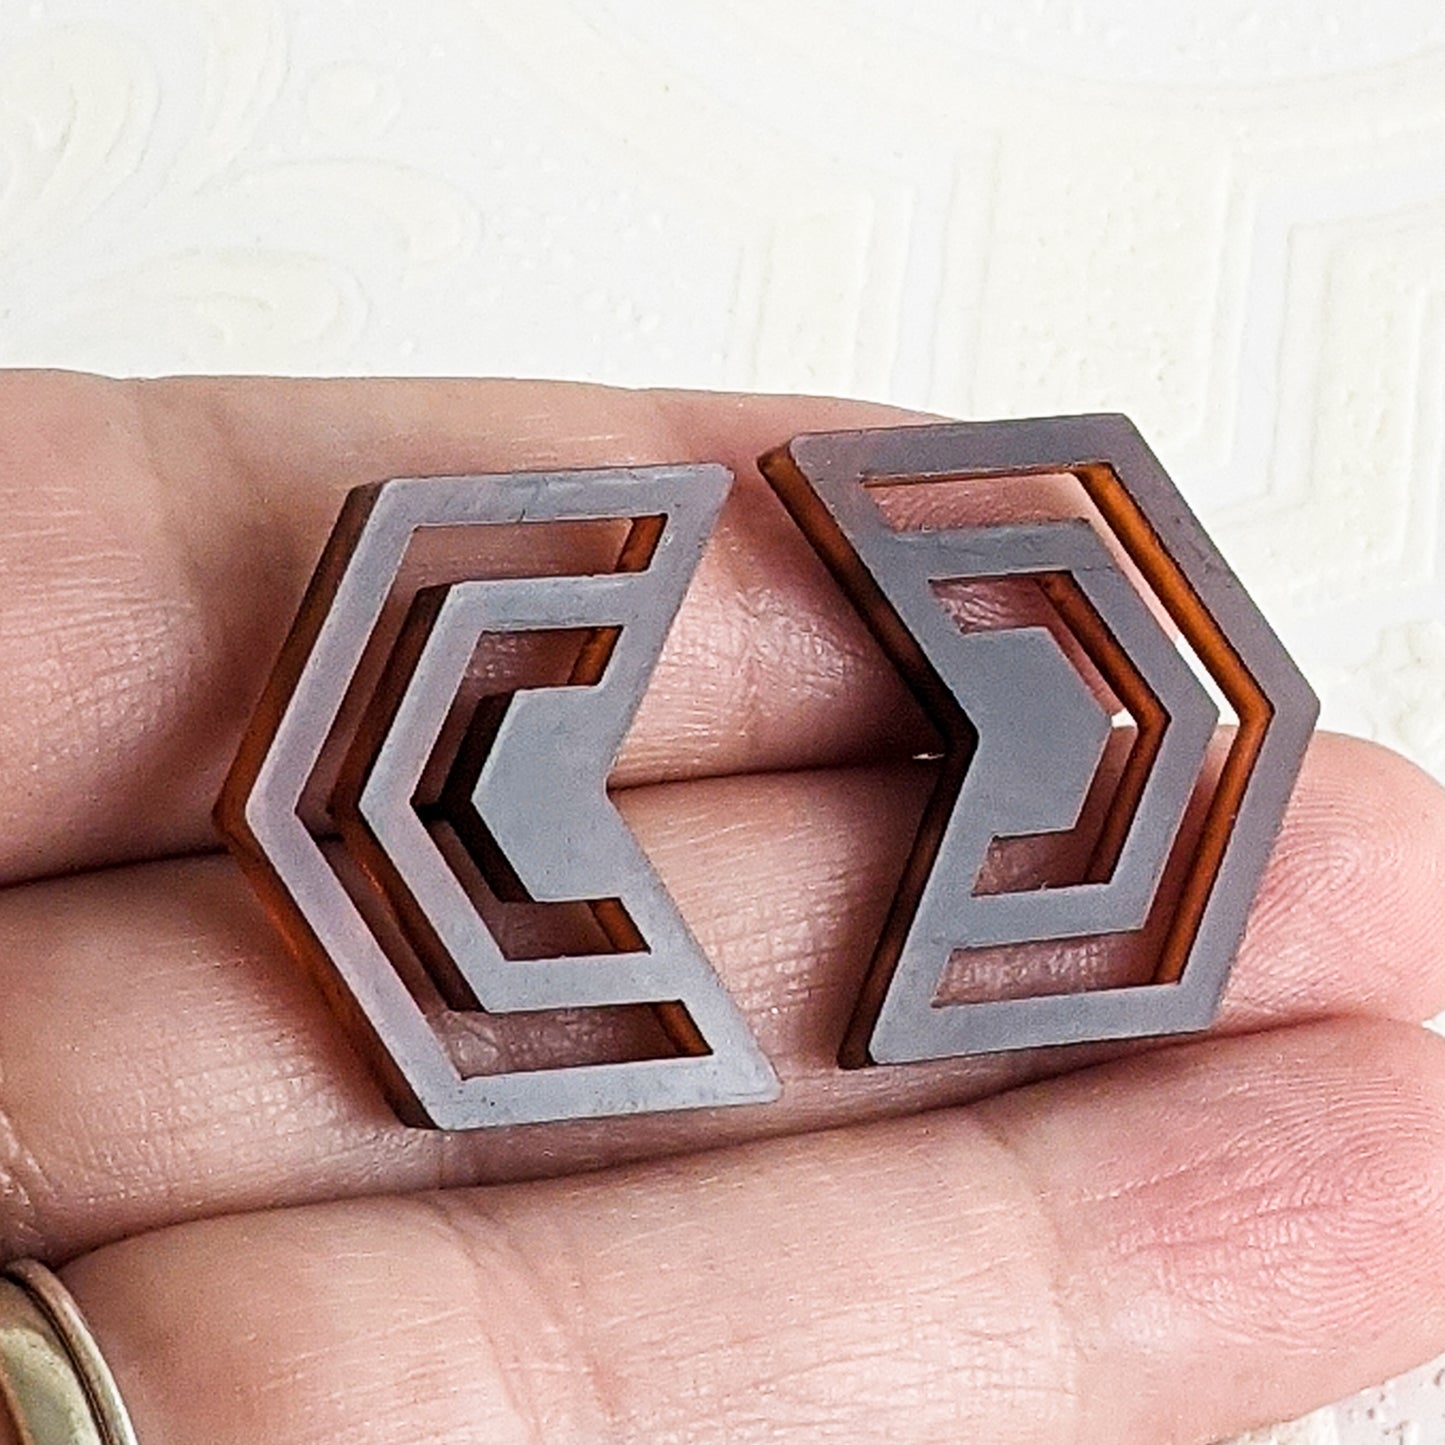 Warm translucent brown and gold tortoiseshell acrylic cut into Irregular Radiating Hexagon Earrings held, showing that the earrings are less than the height of two fingers.  